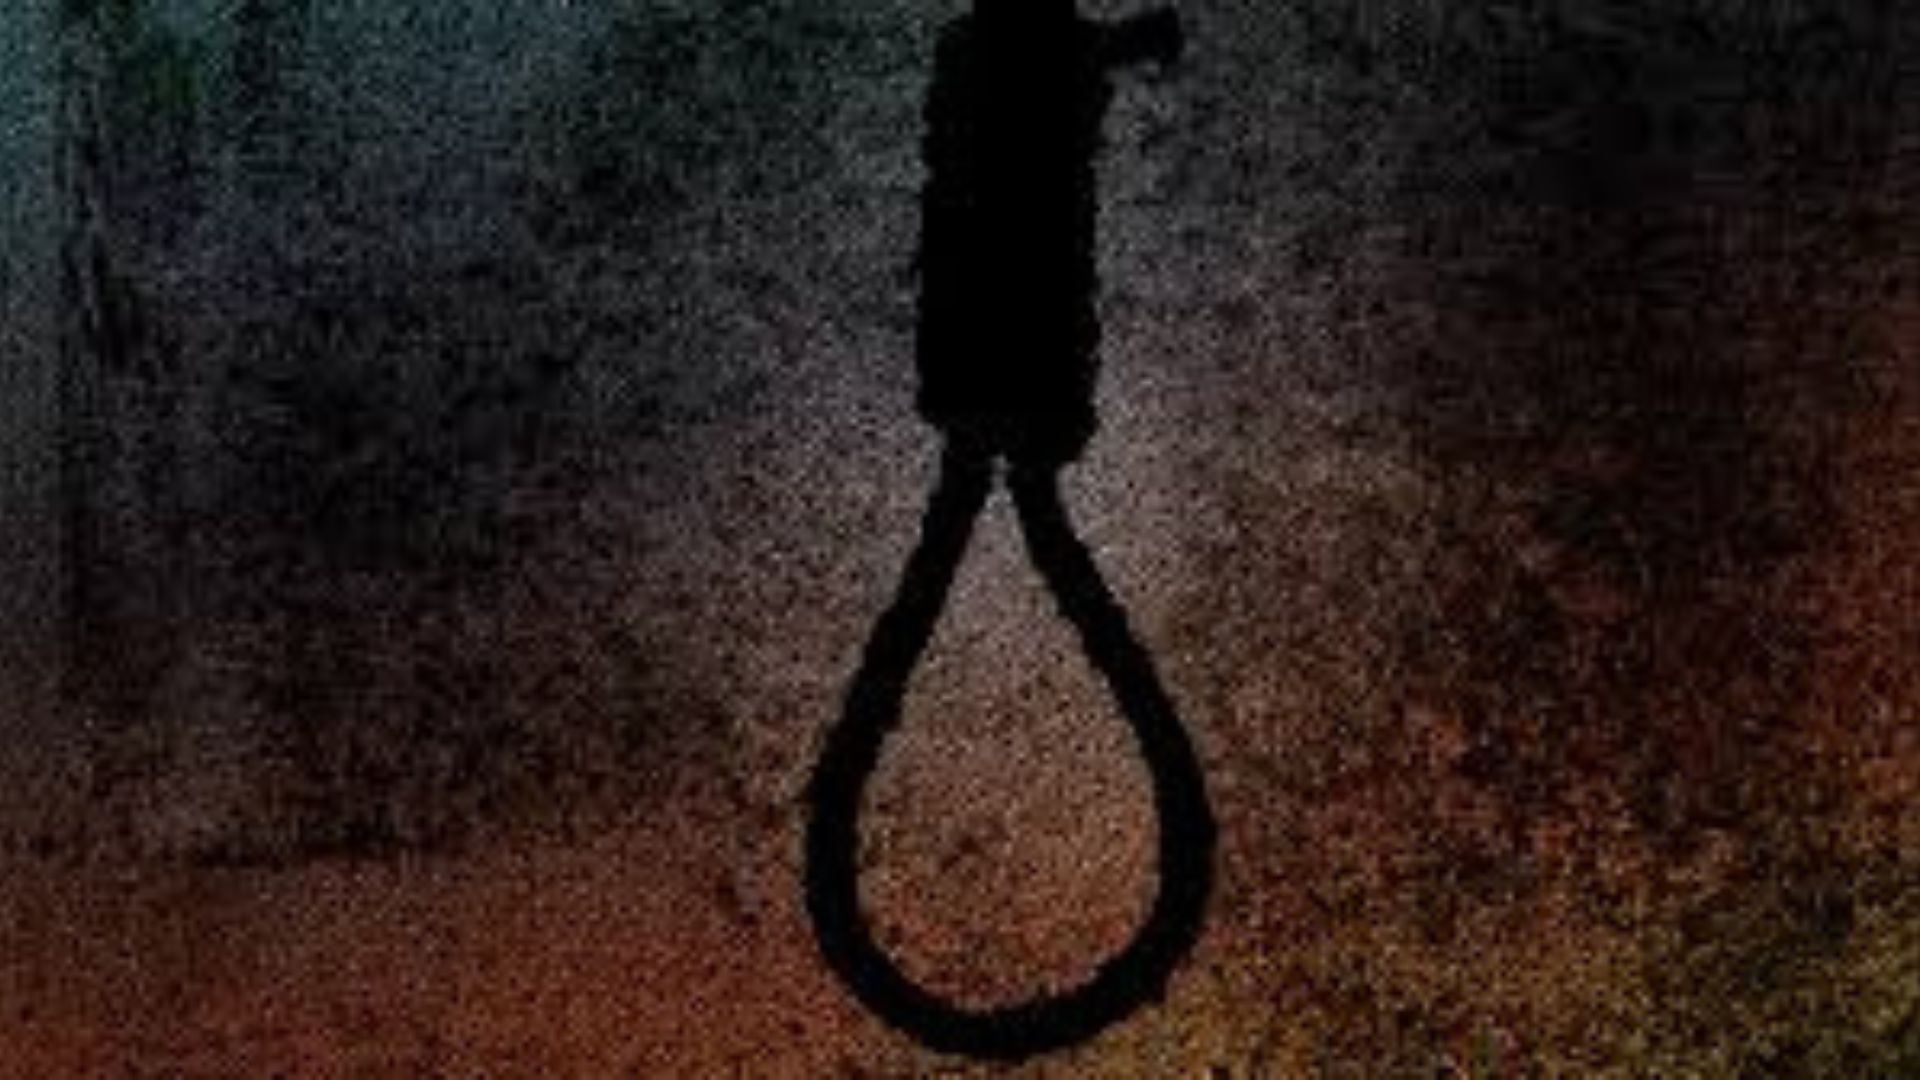 Pakistan: Mother denies request for phone, Son hangs himself